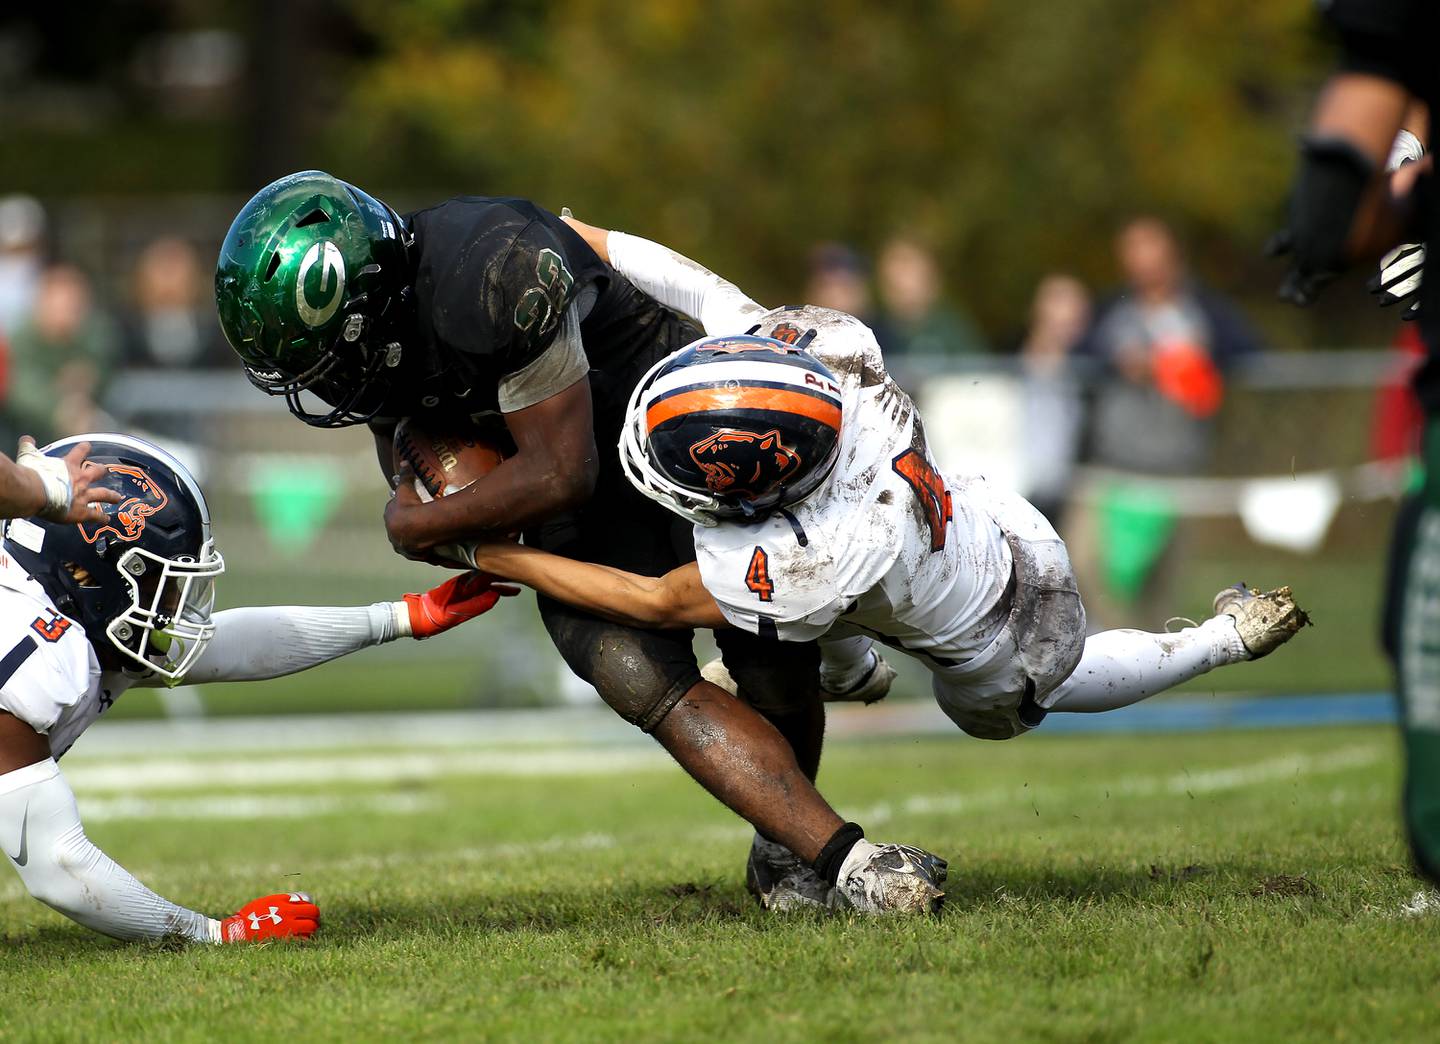 Glenbard West's Jason Thomas (23) is tackled by Oswego's Triston August (4) during a Class 8A playoffs first-round game in Glen Ellyn on Saturday, Oct. 30, 2021.